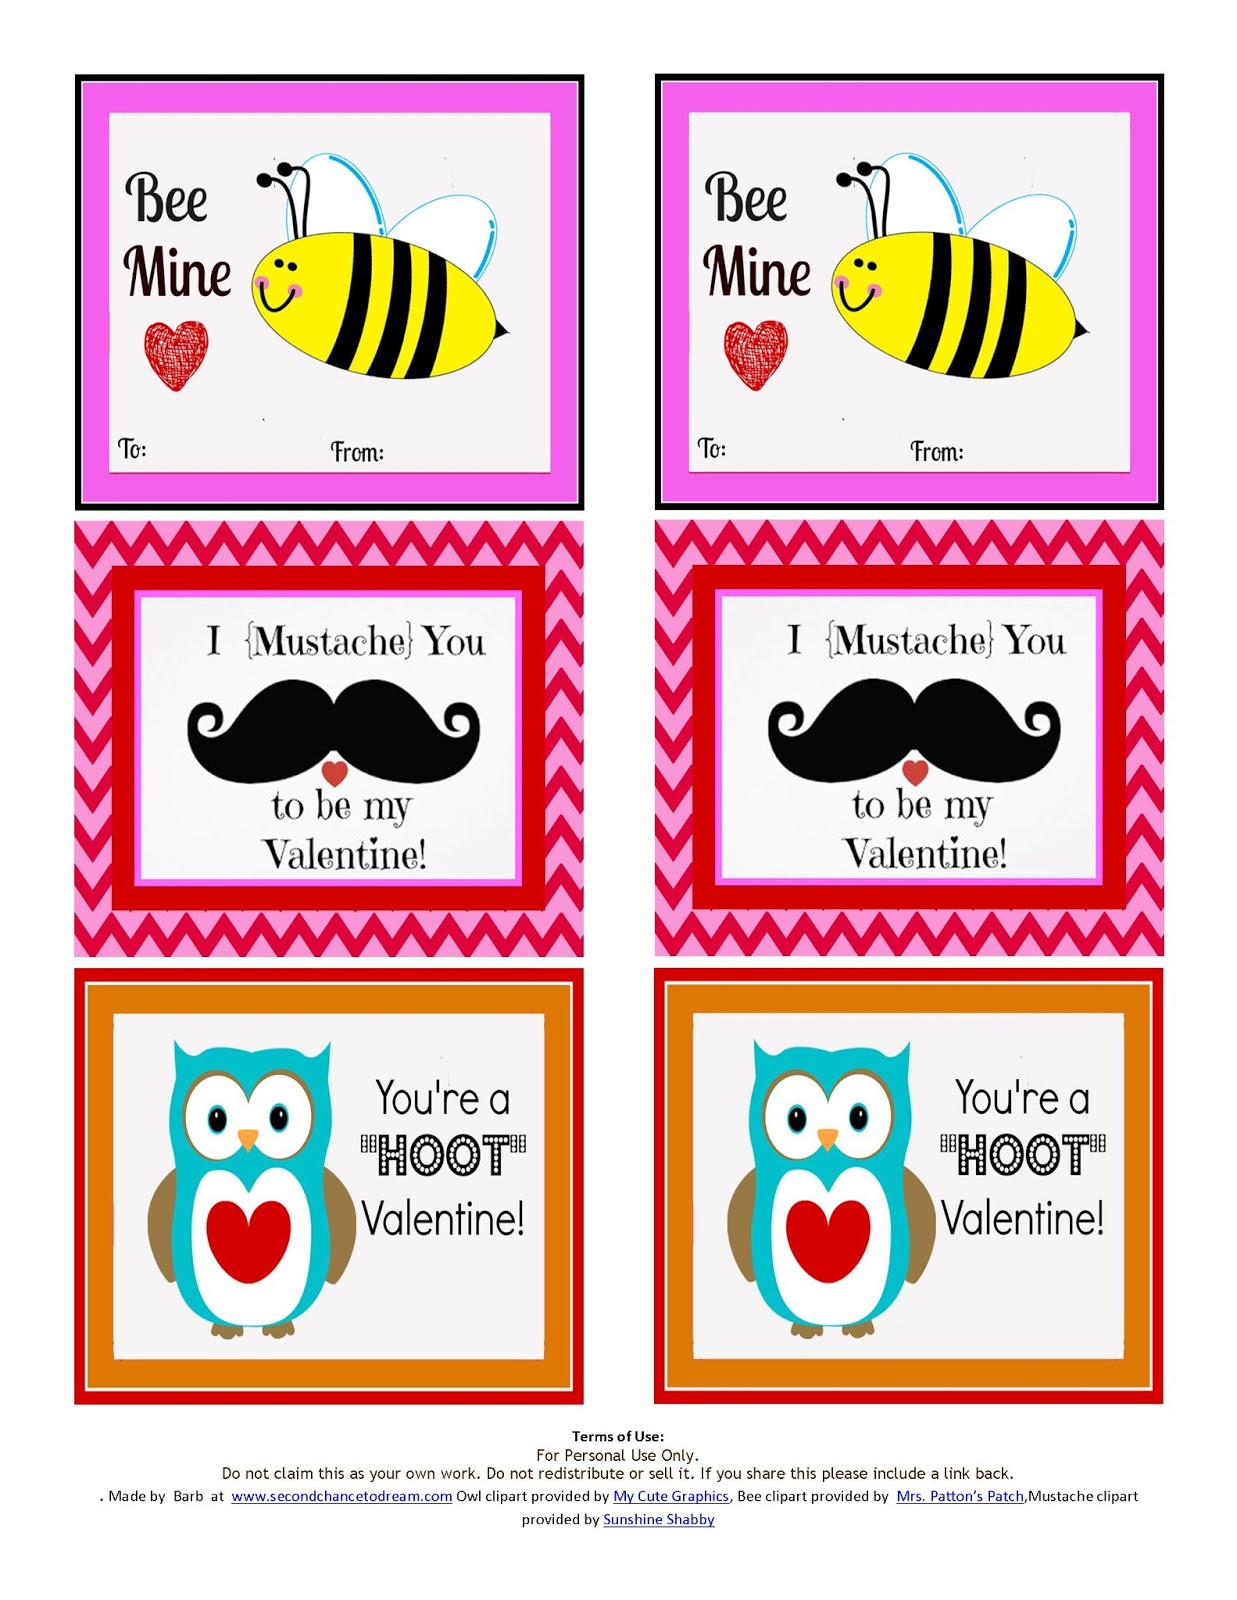 second-chance-to-dream-printable-valentine-s-day-cards-and-cupcake